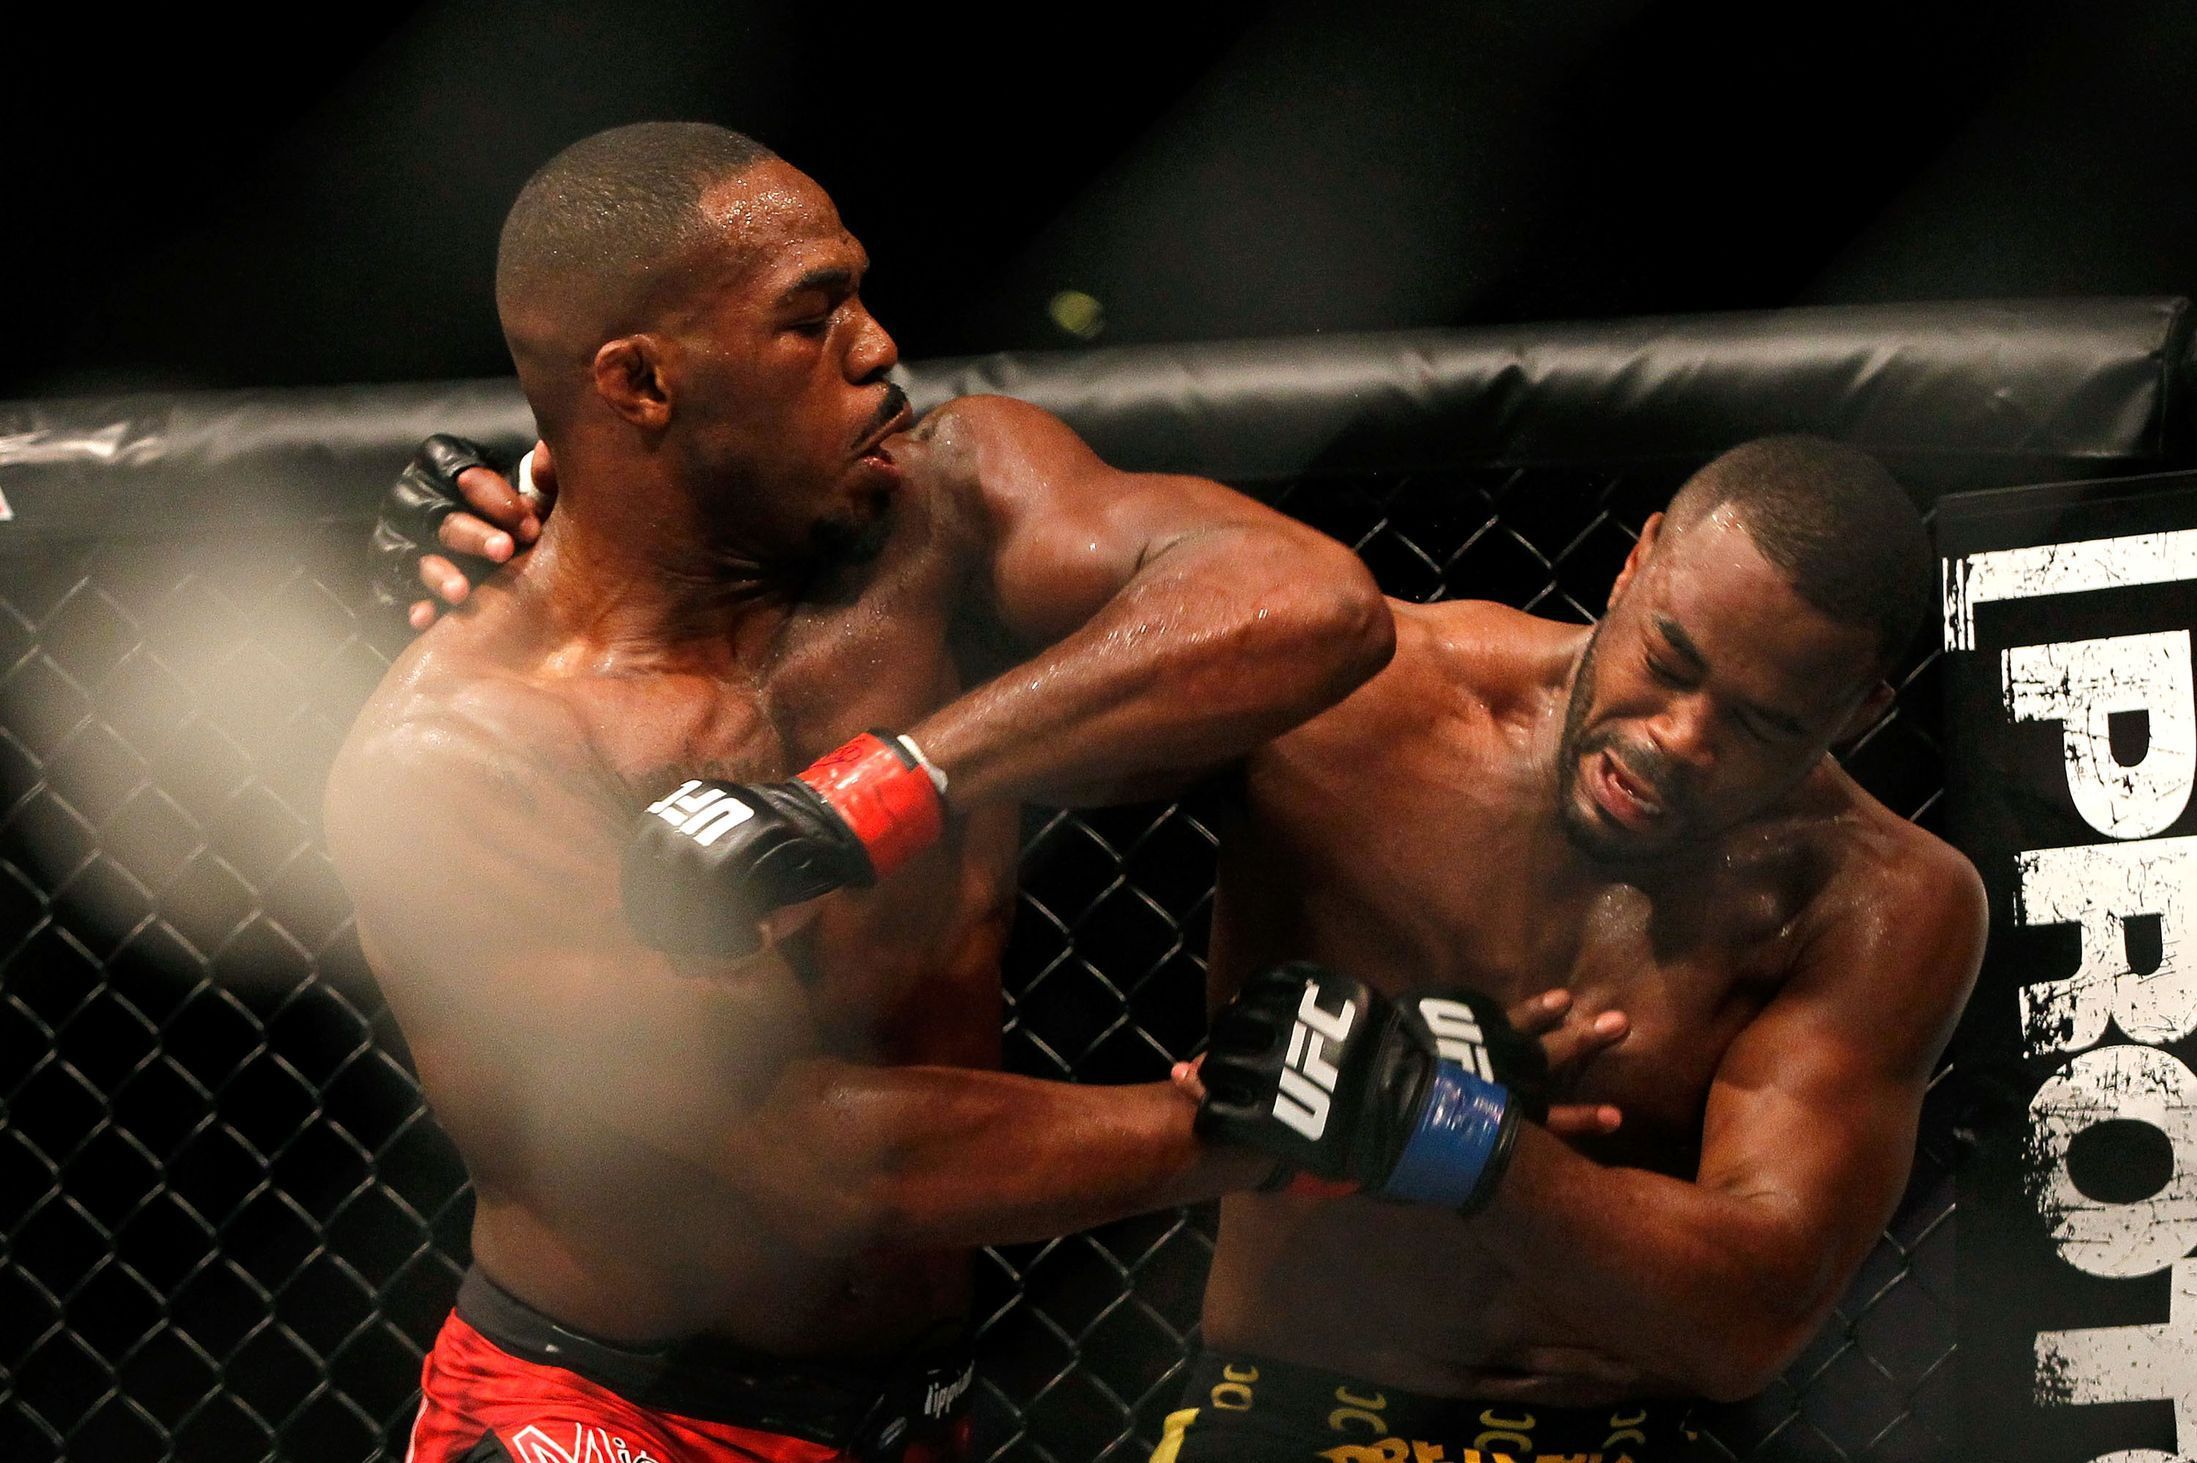 Fearless UFC fighter Jon Jones wallpapers and images - wallpapers